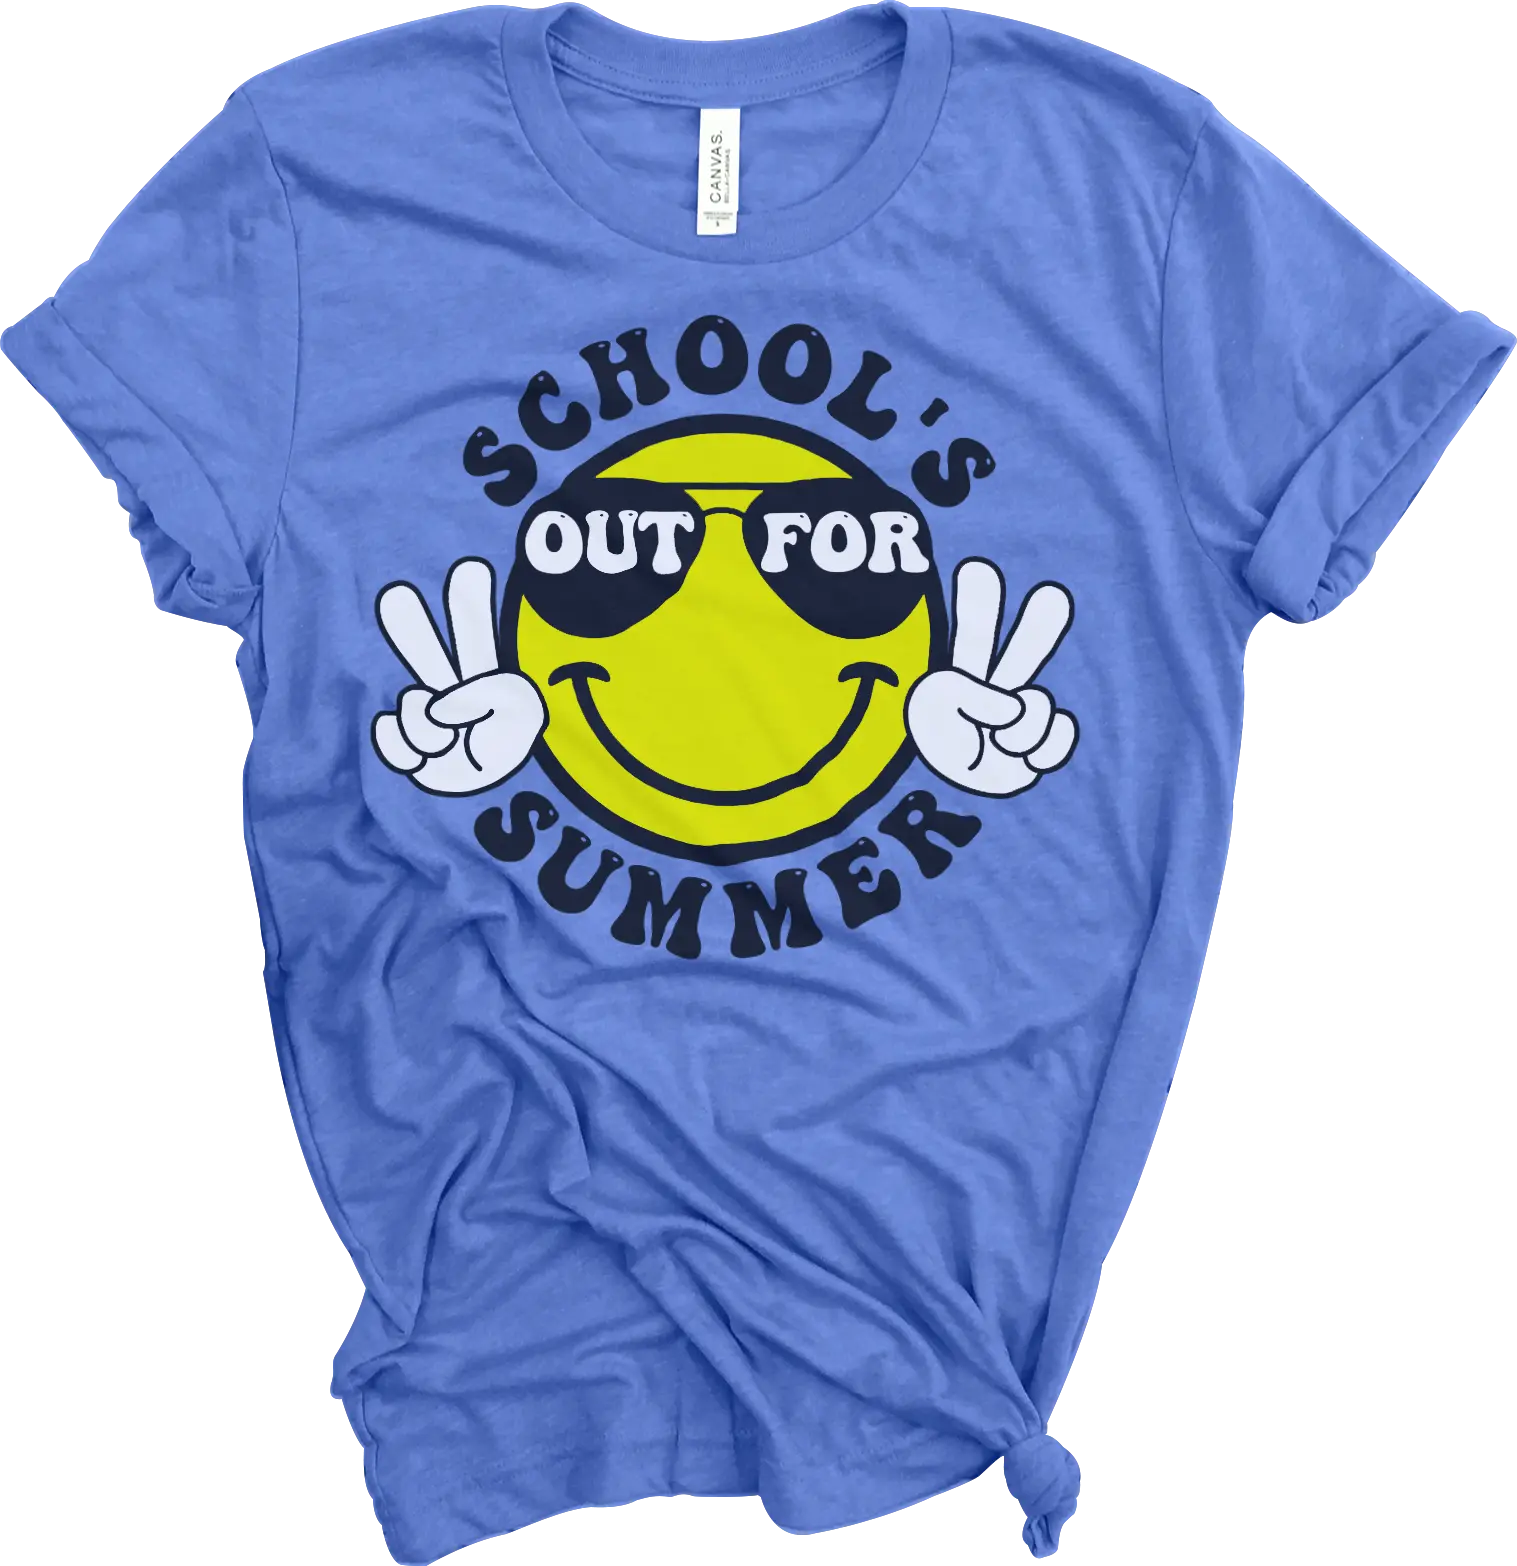 "Schools Out For Summer" Excusive Tee